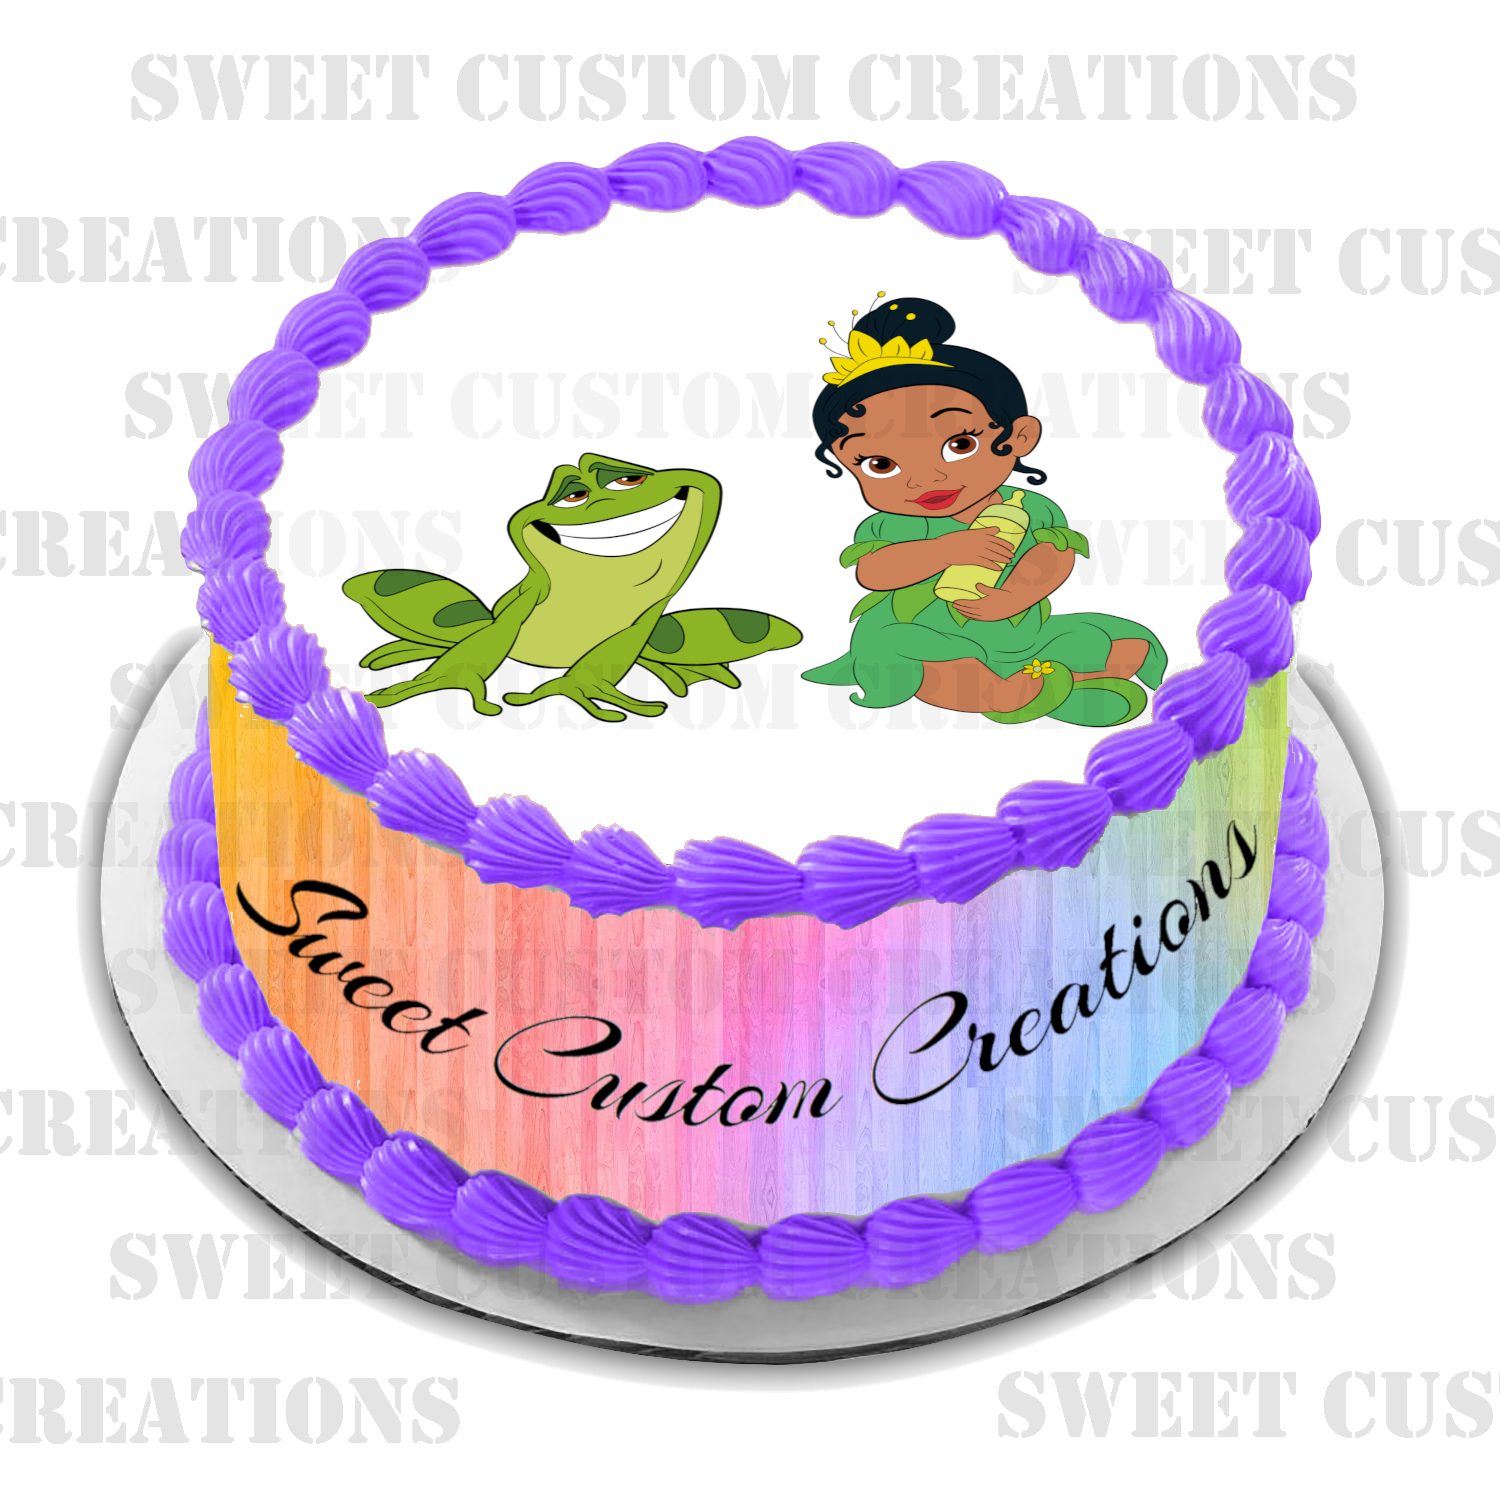 YCKens Happy Birthday Cake Topper for Tiana - The Princess Tiana and The  Frog Cake Decorations Party Cake Decors for Girls (Double-sided) -  Walmart.com